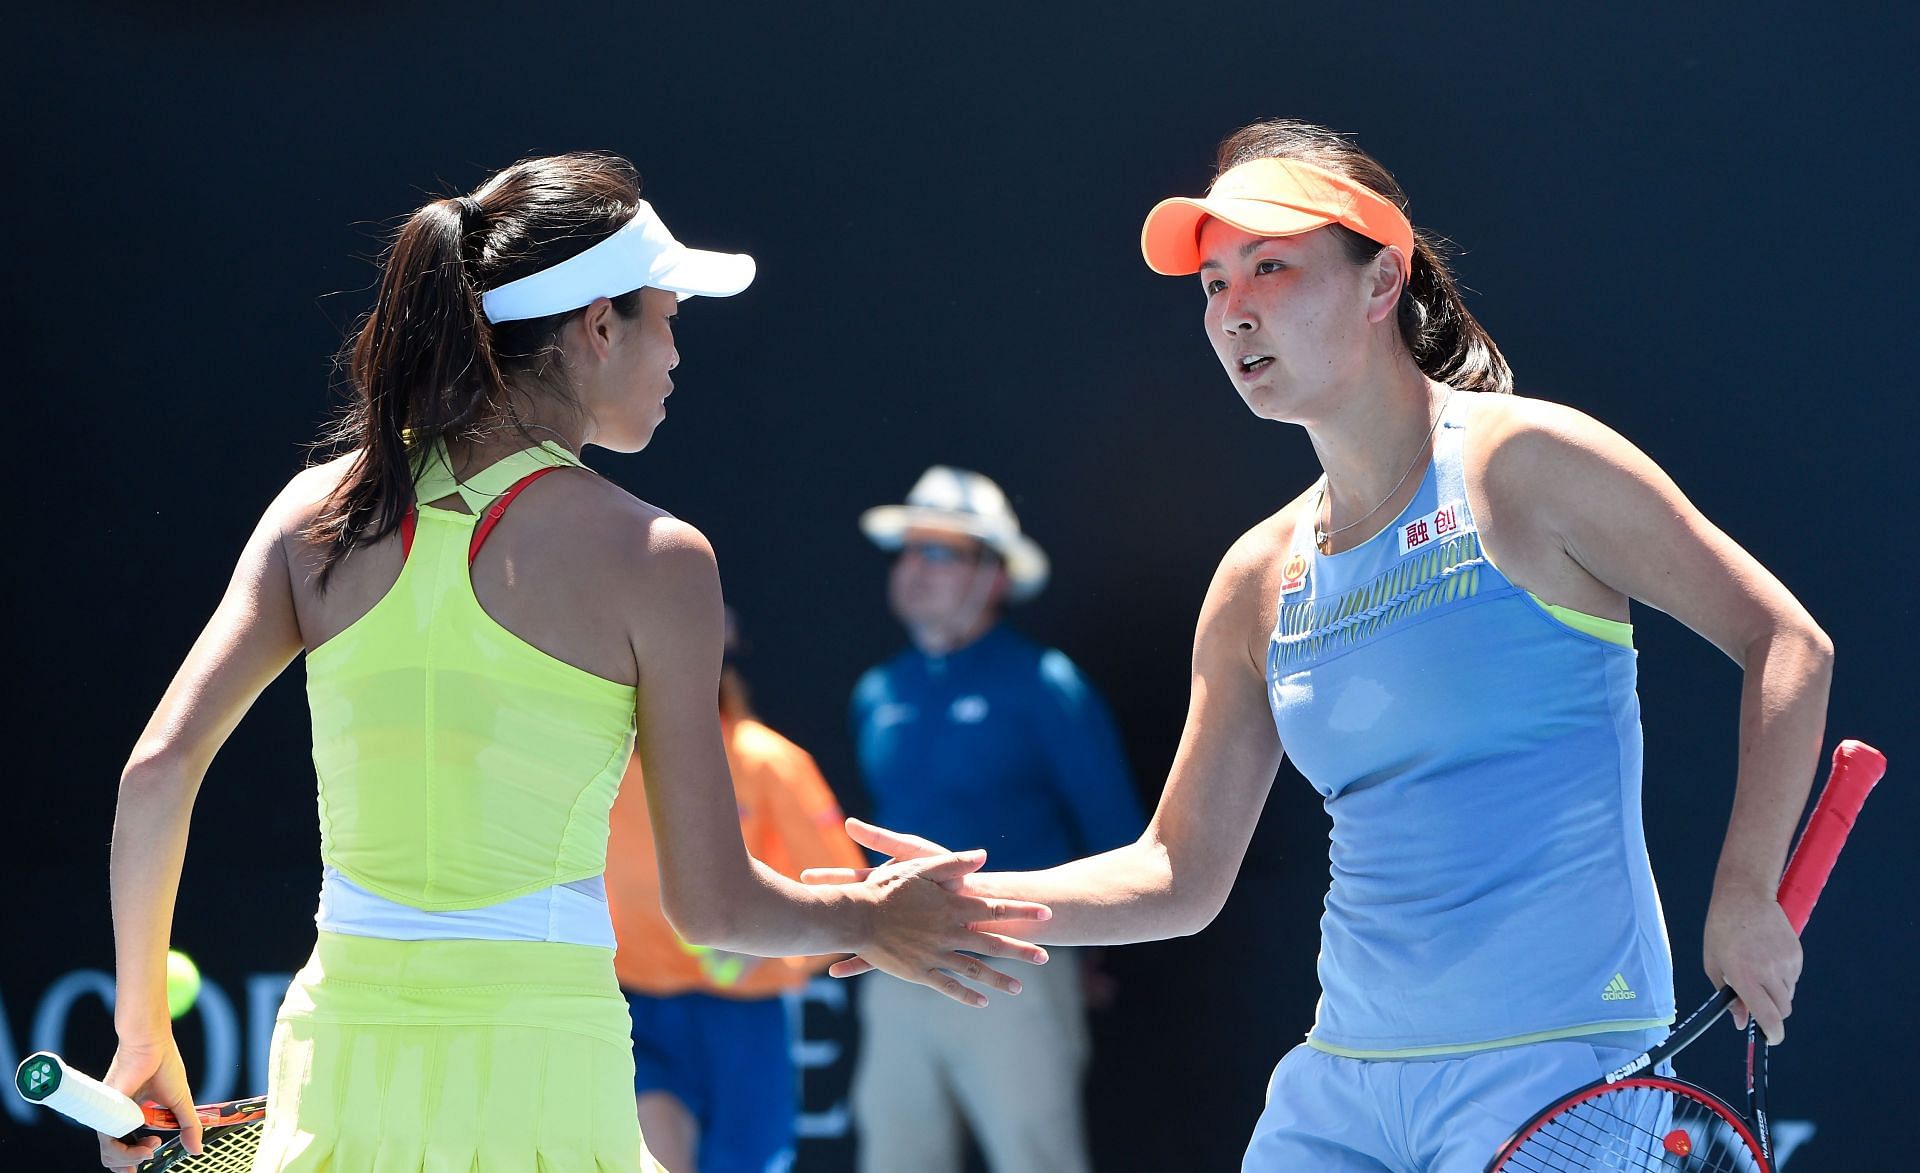 Fellow players continue to come forward in support for Peng Shuai.